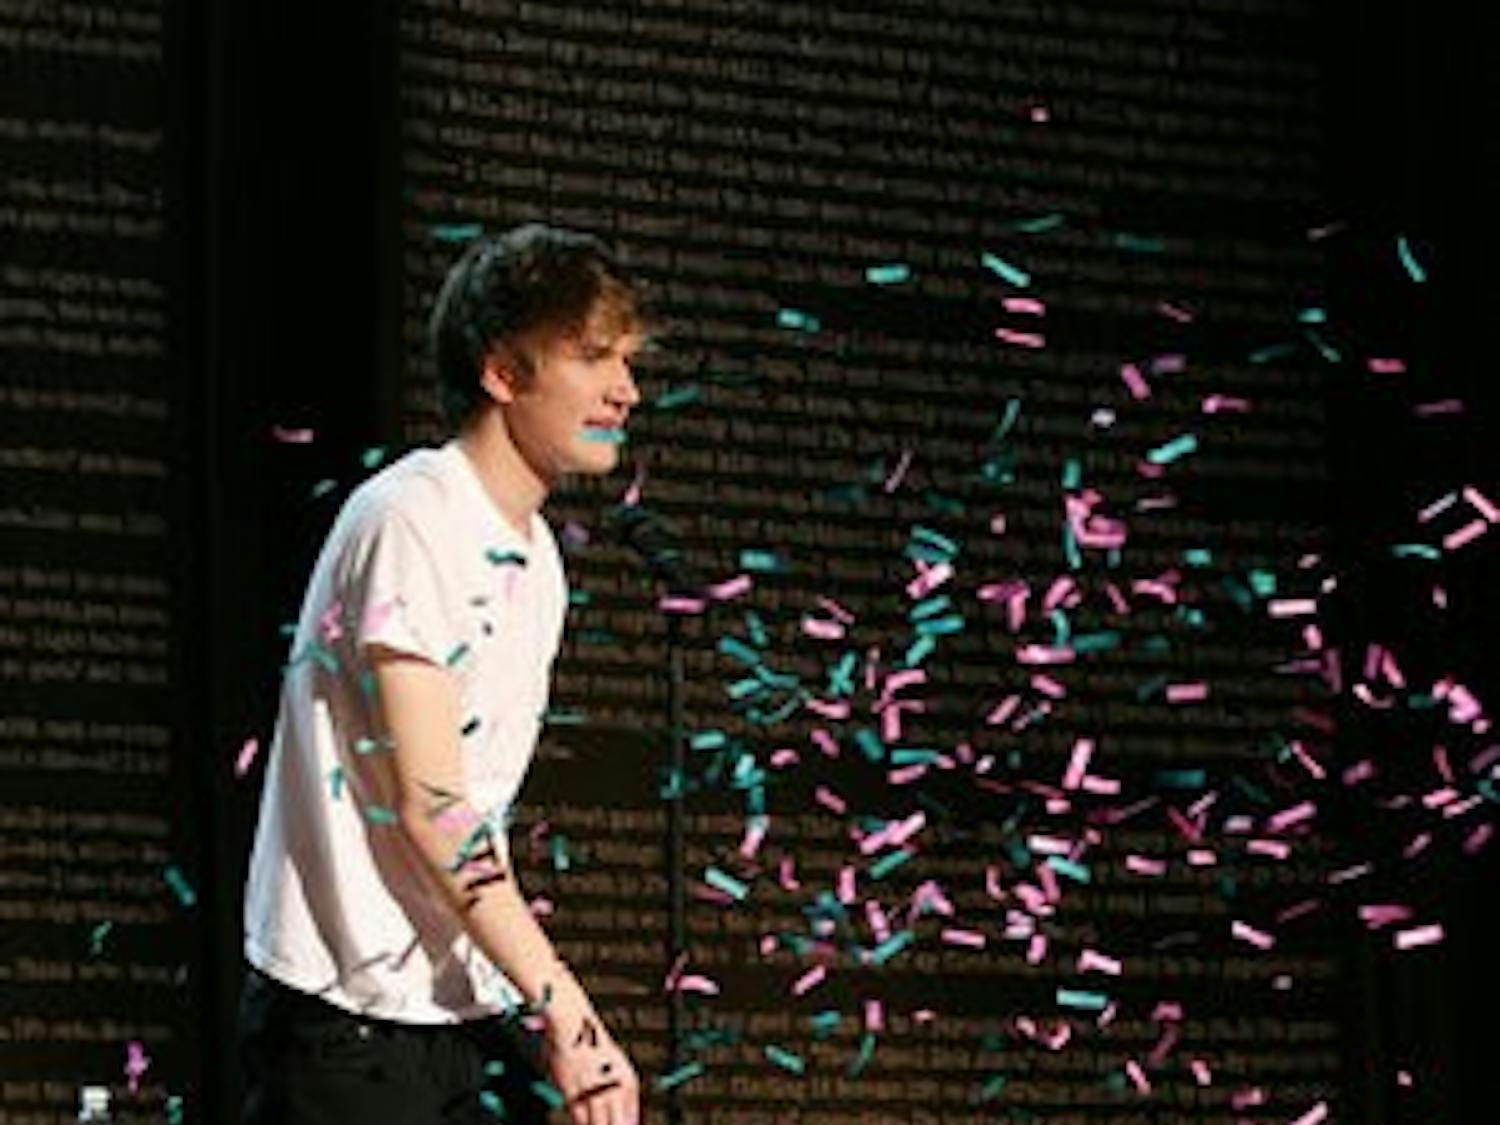 Bo Burnham, comedian and YouTube star, will perform at the Student Act March 28. (contributed by Marc Deley)